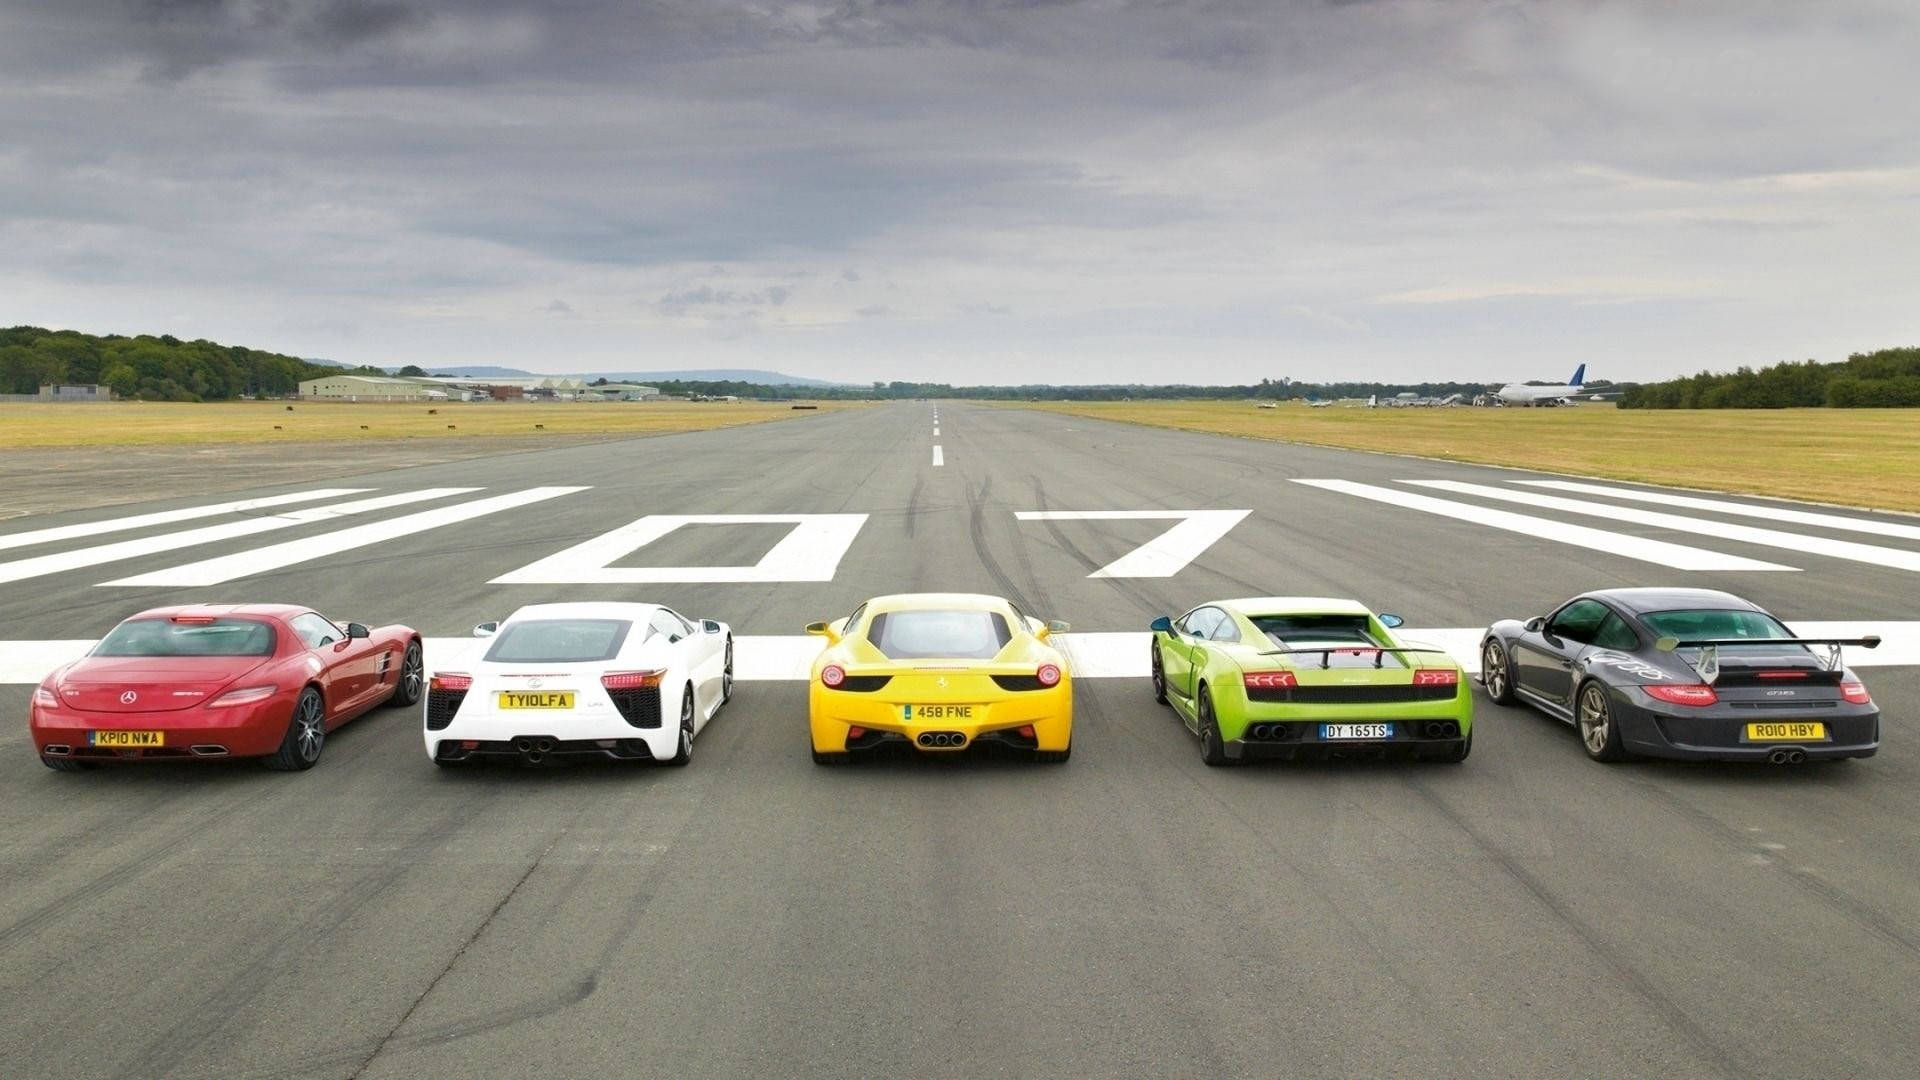 Supercars On The Runway Wallpaper